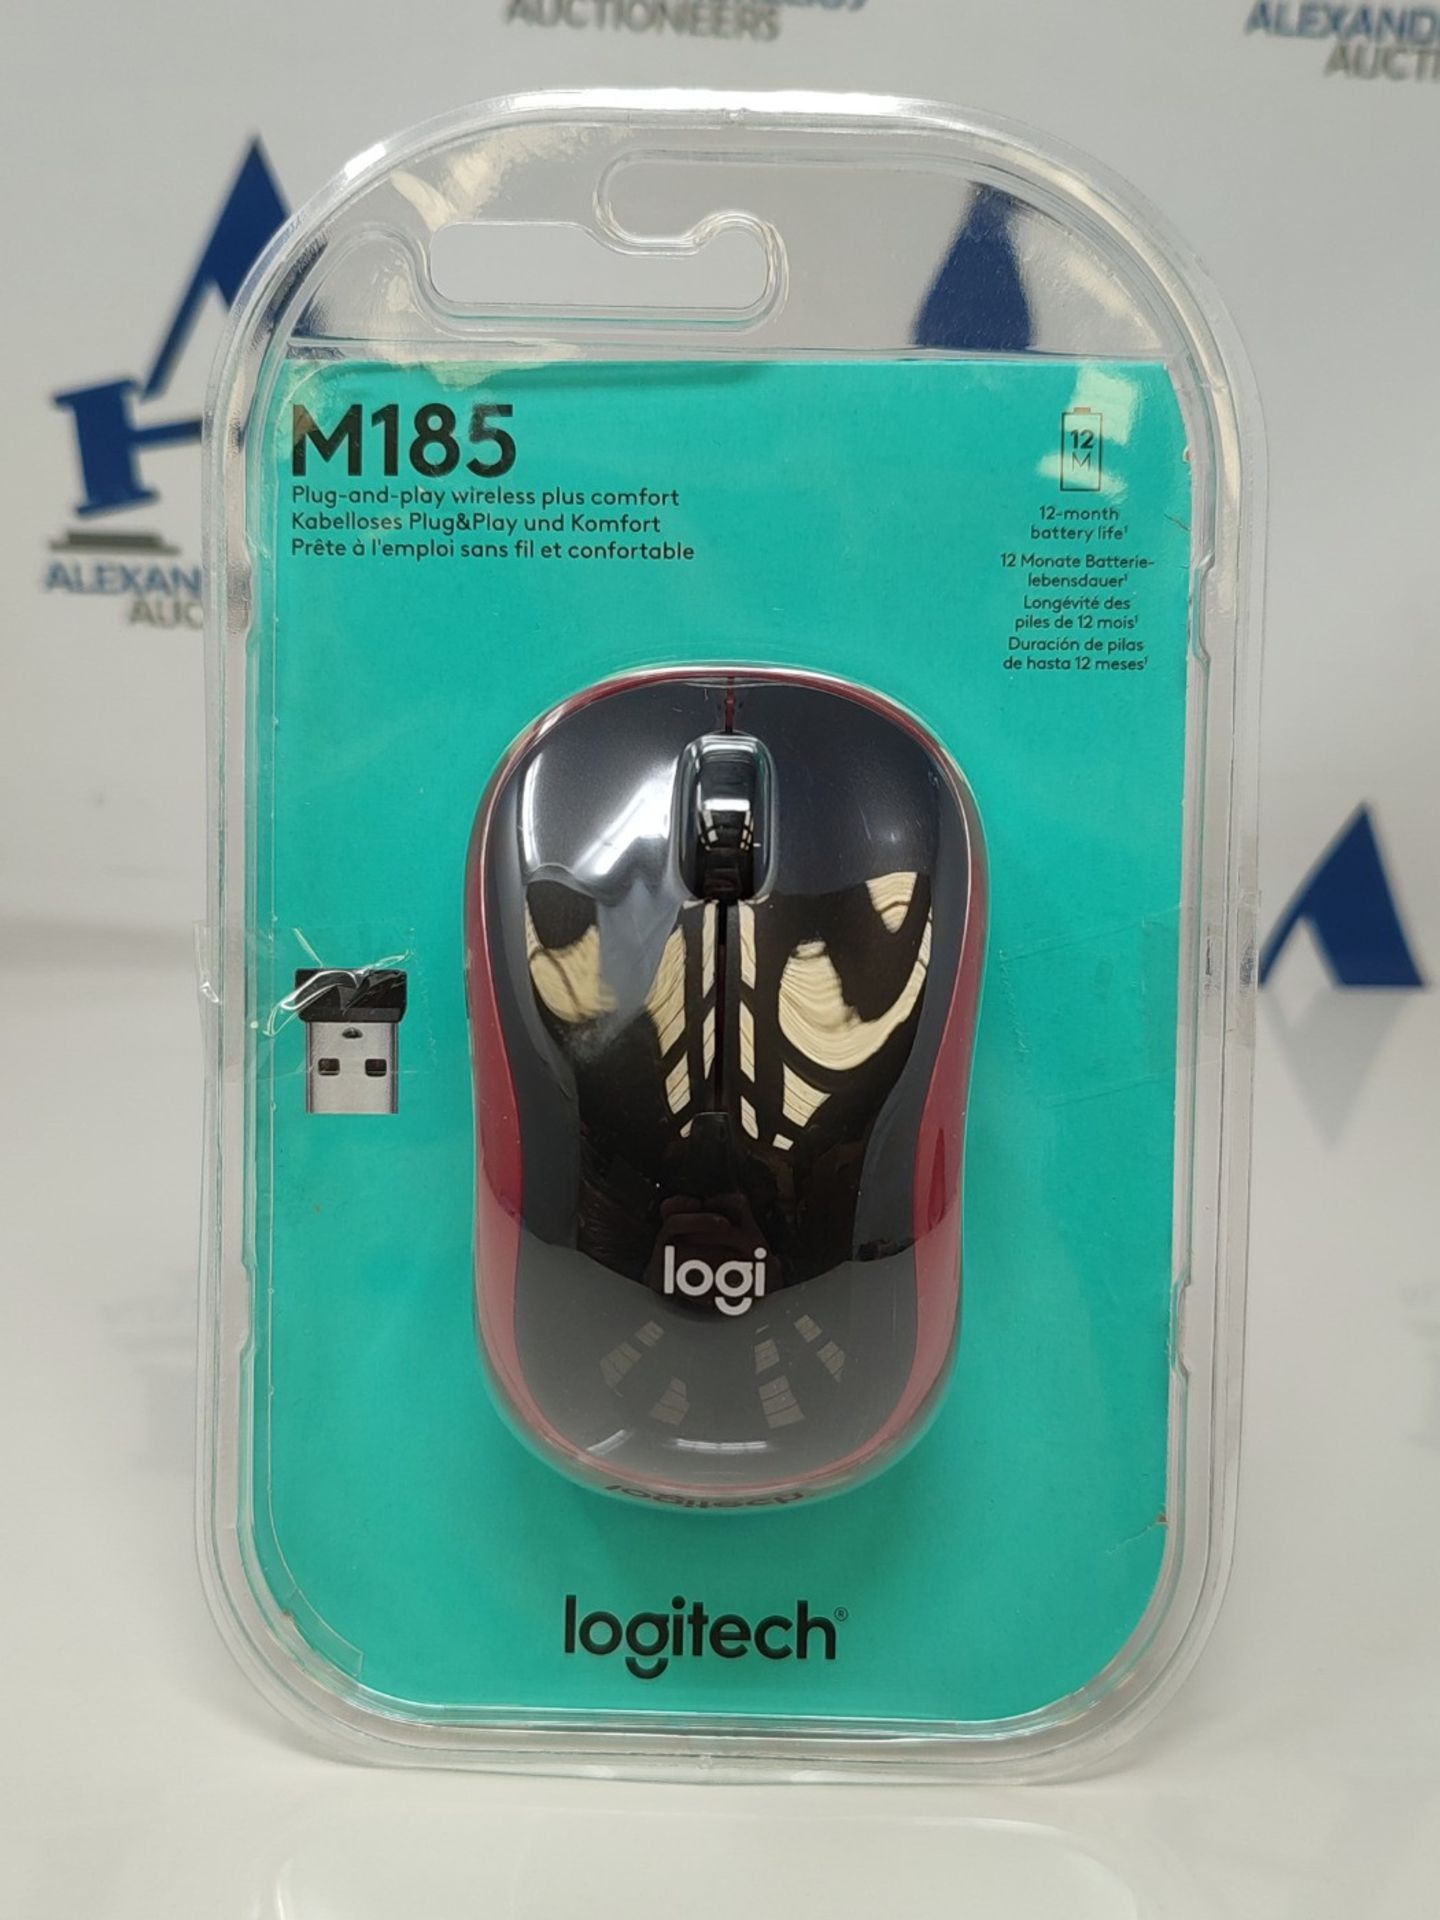 Logitech M185 Wireless Mouse, 2.4 GHz with Mini USB Receiver, 12 Month Battery Life, 1 - Image 2 of 3